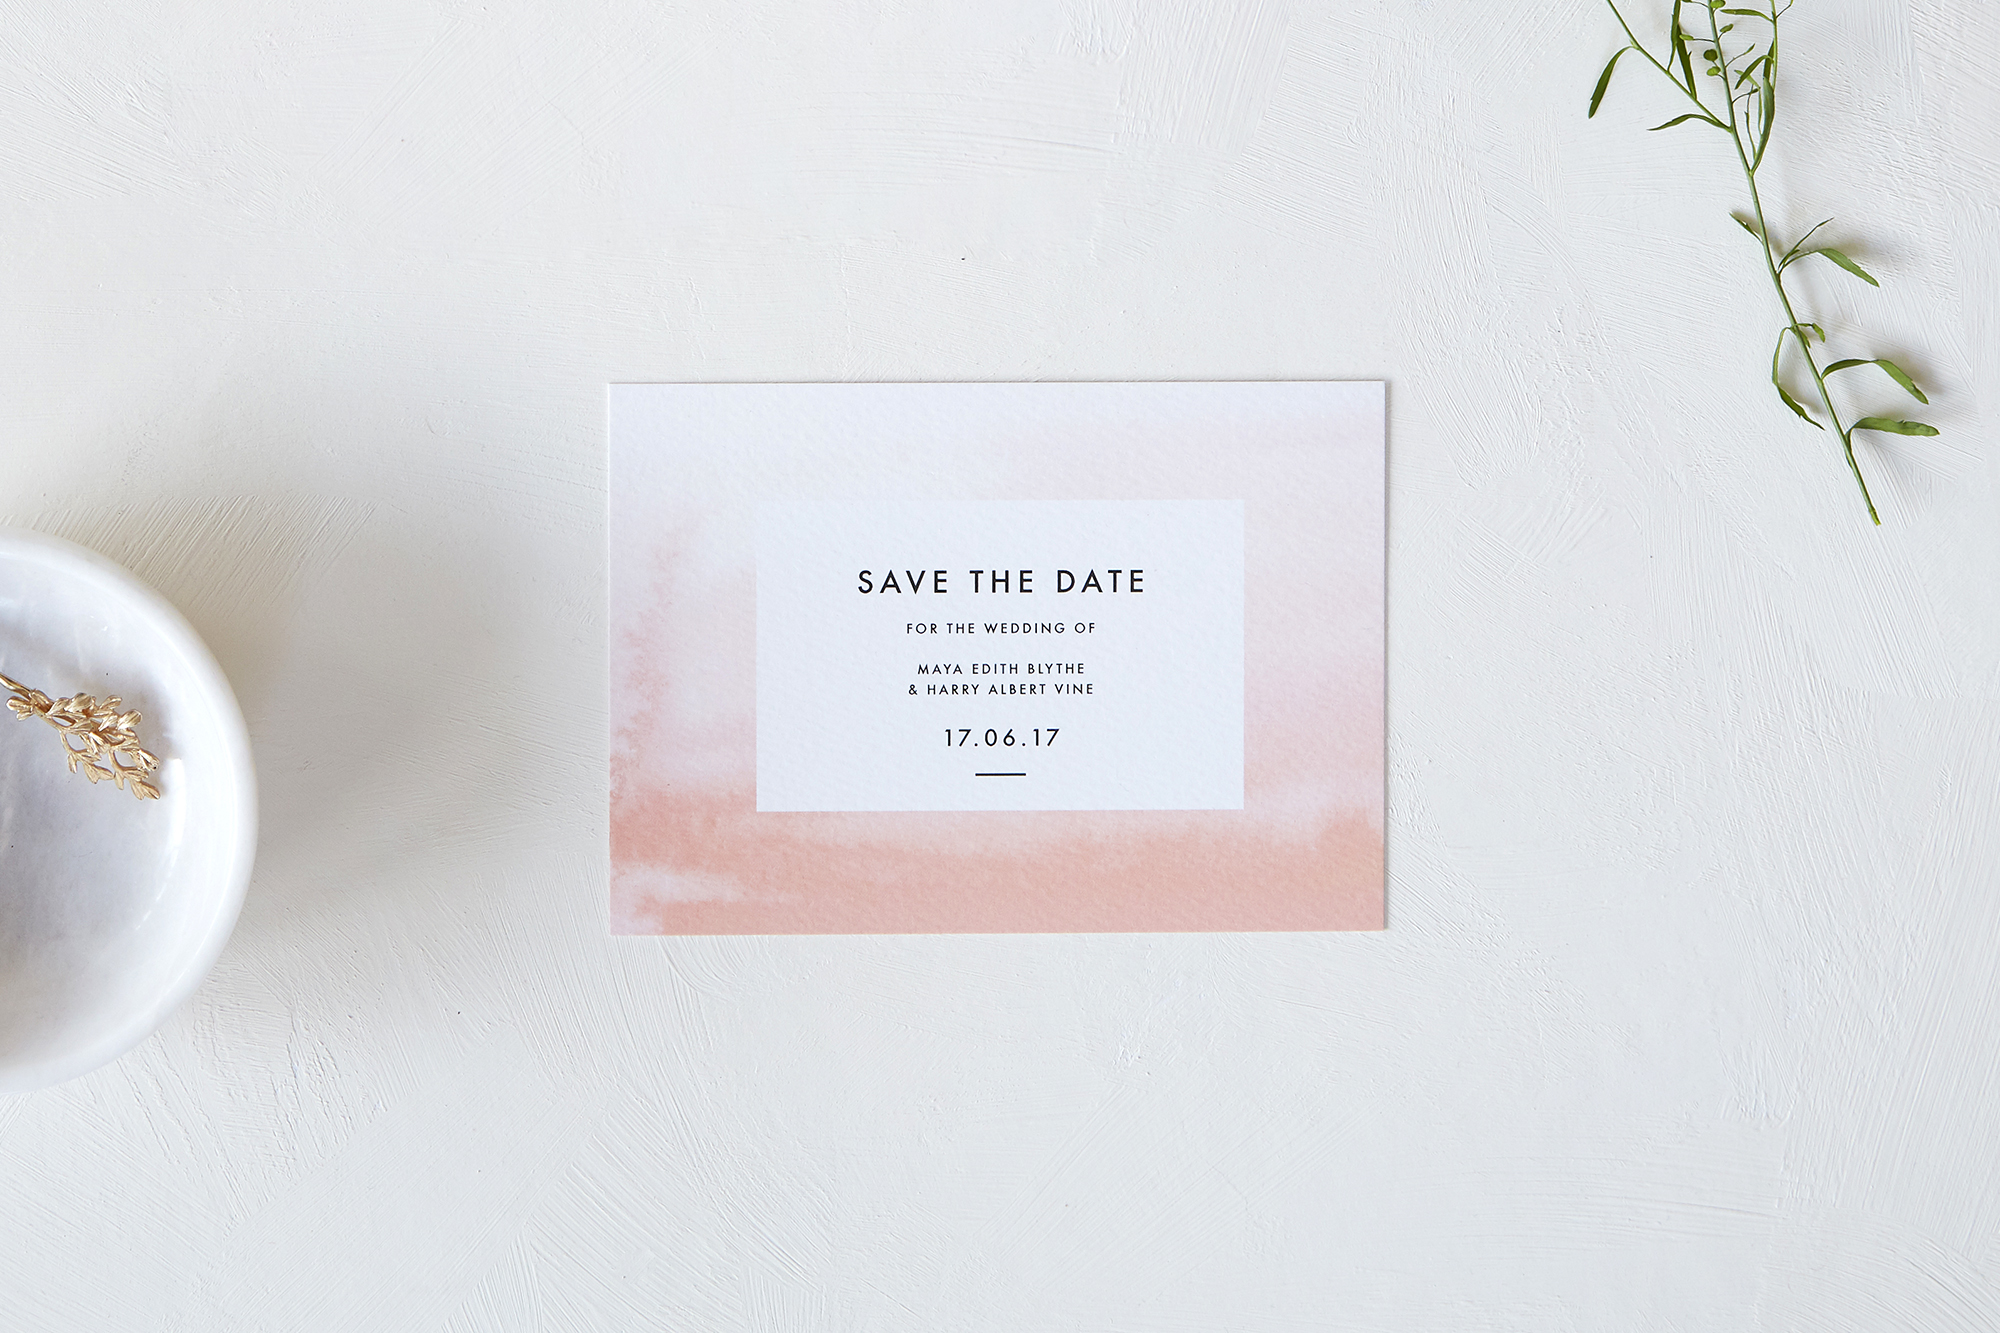 Studio Sophie save the date peach ombre